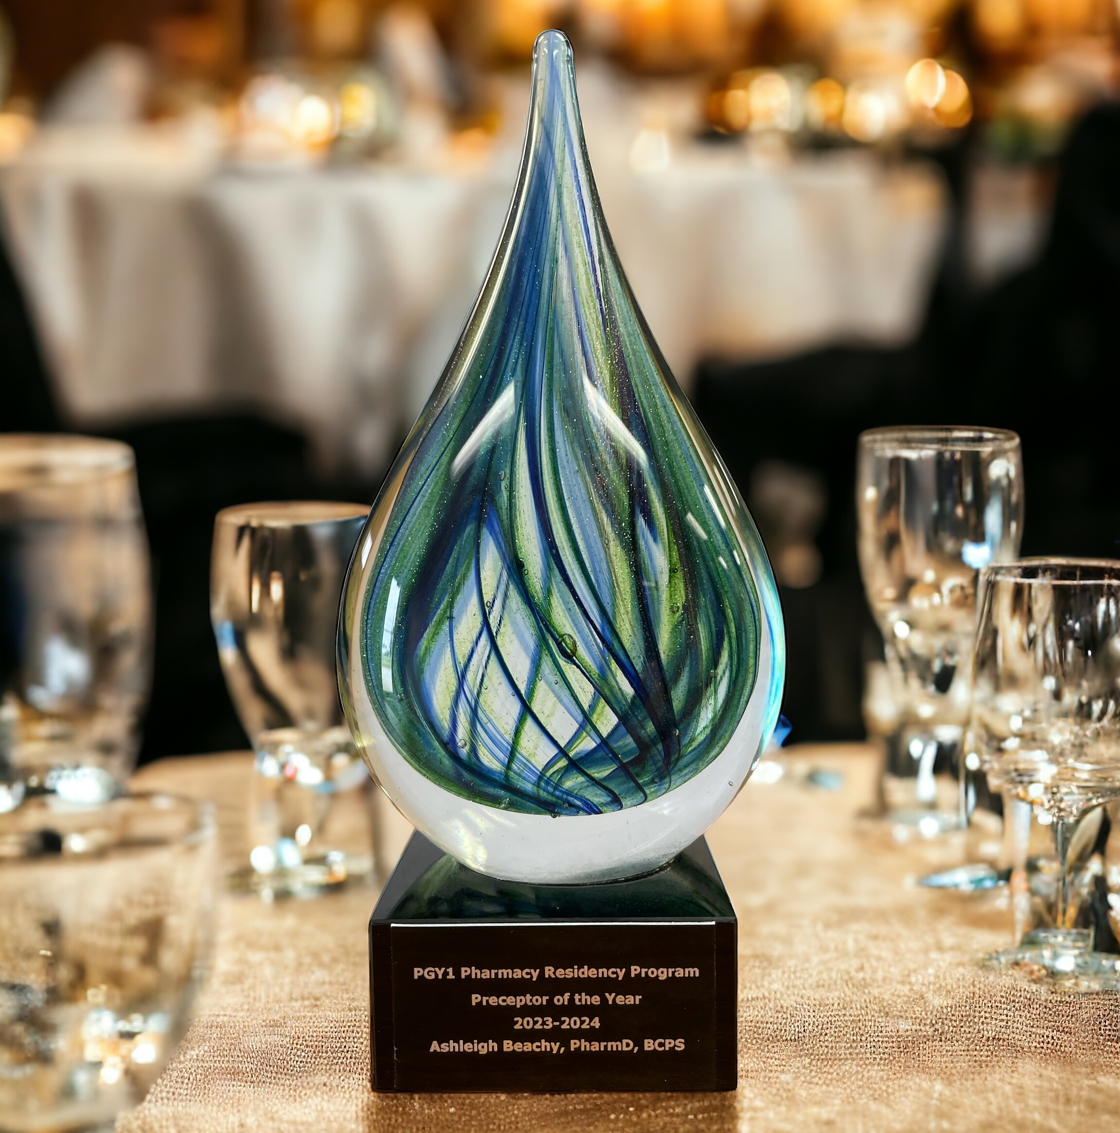 Our Green Teardrop Art Glass Award features a solid glass teardrop with green & metallic gold throughout. It's mounted on a black glass base with a black & gold engraving plate for personalization. This one is sitting on a gold table at an awards ceremony.